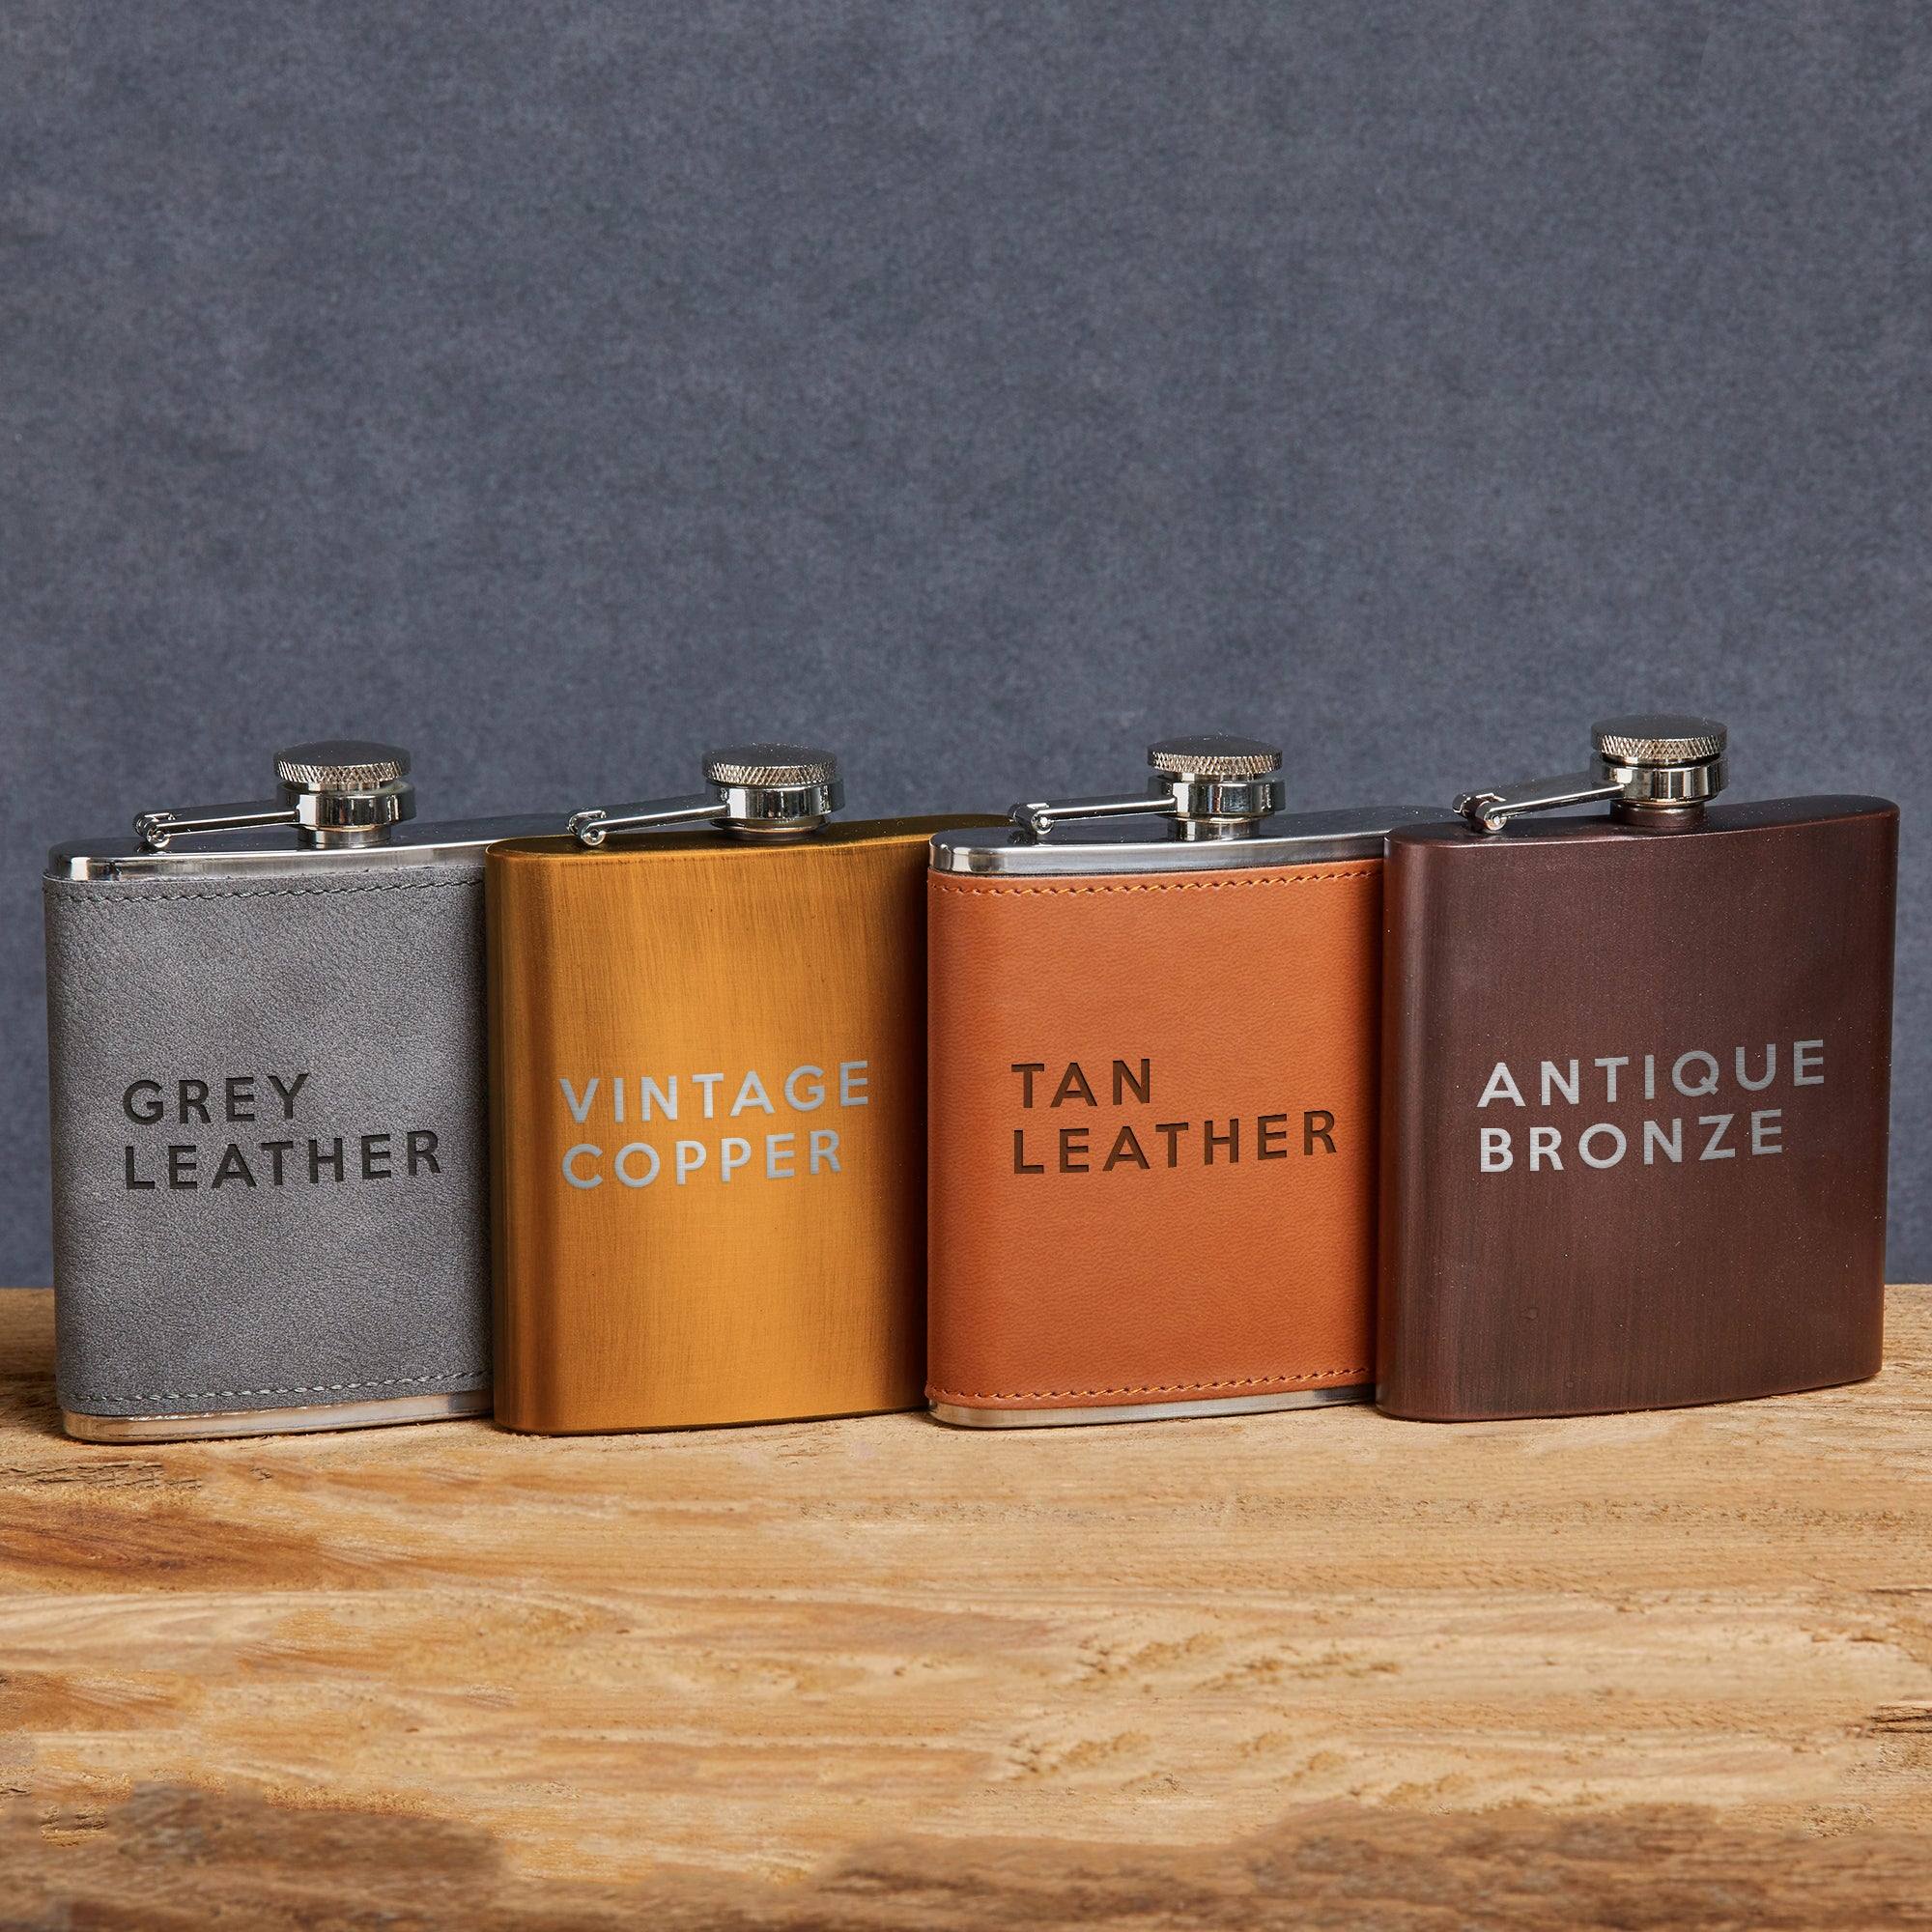 Graduation Hip Flask With Personalisation - Dustandthings.com